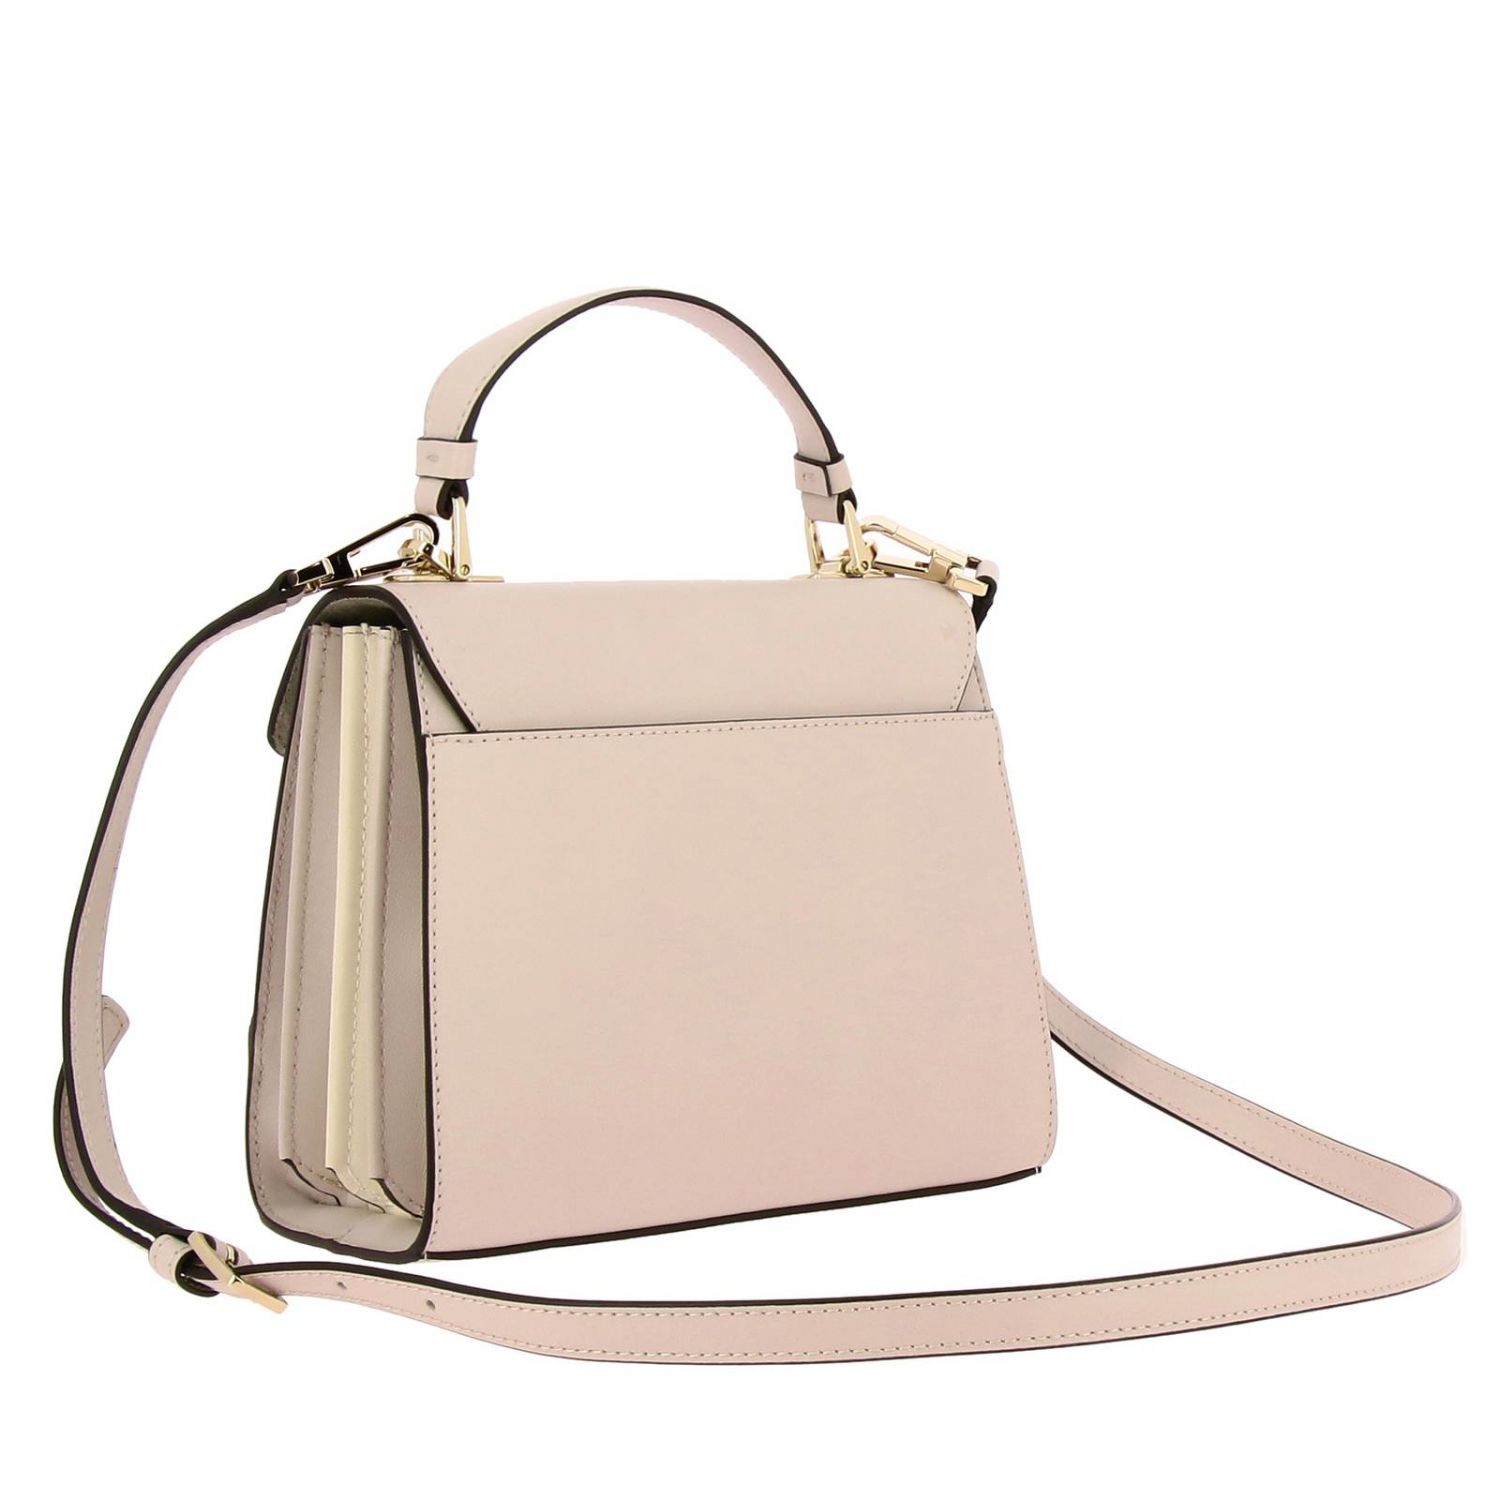 Furla Outlet: Mughetto bag in smooth leather with butterfly jewel ...